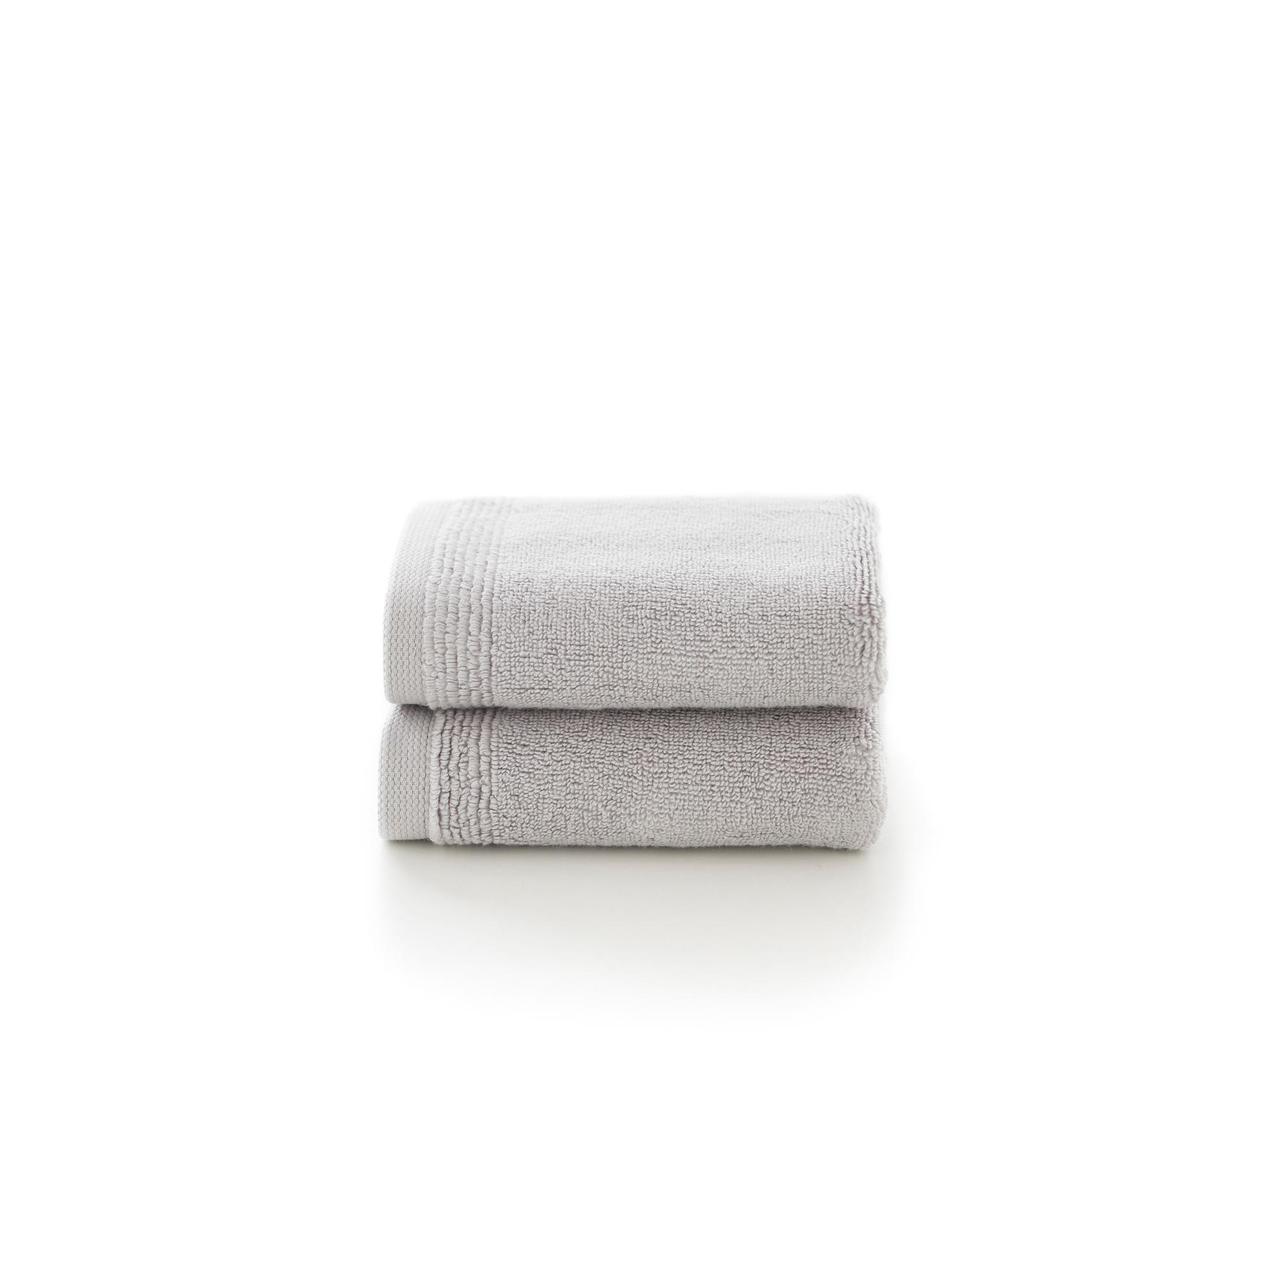 Deyongs Palazzo 800gsm Hotel Luxury Cotton Face Cloth x 2 Silver